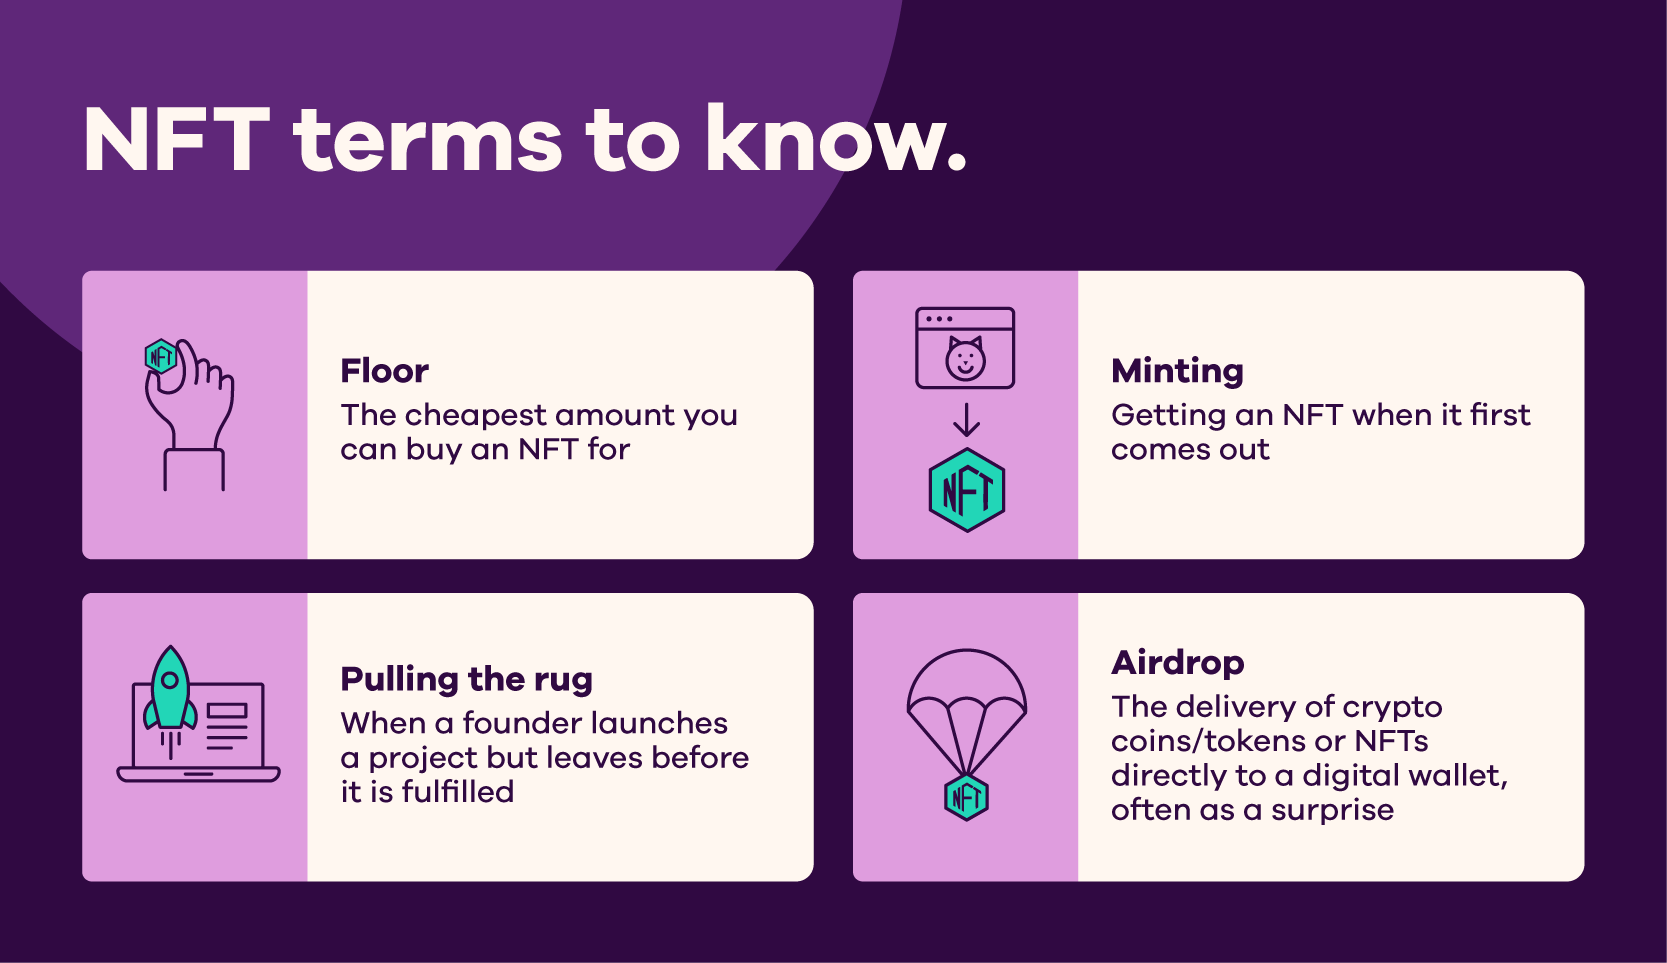 NFT terms and definitions: Floor – The cheapest amount you can buy an NFT for, Minting – Getting an NFT when it first comes out, Pulling the rug – When a founder launches a project but leaves before it is fulfilled, Airdrop – The delivery of crypto coins/tokens or NFTs directly to a digital wallet, often as a surprise